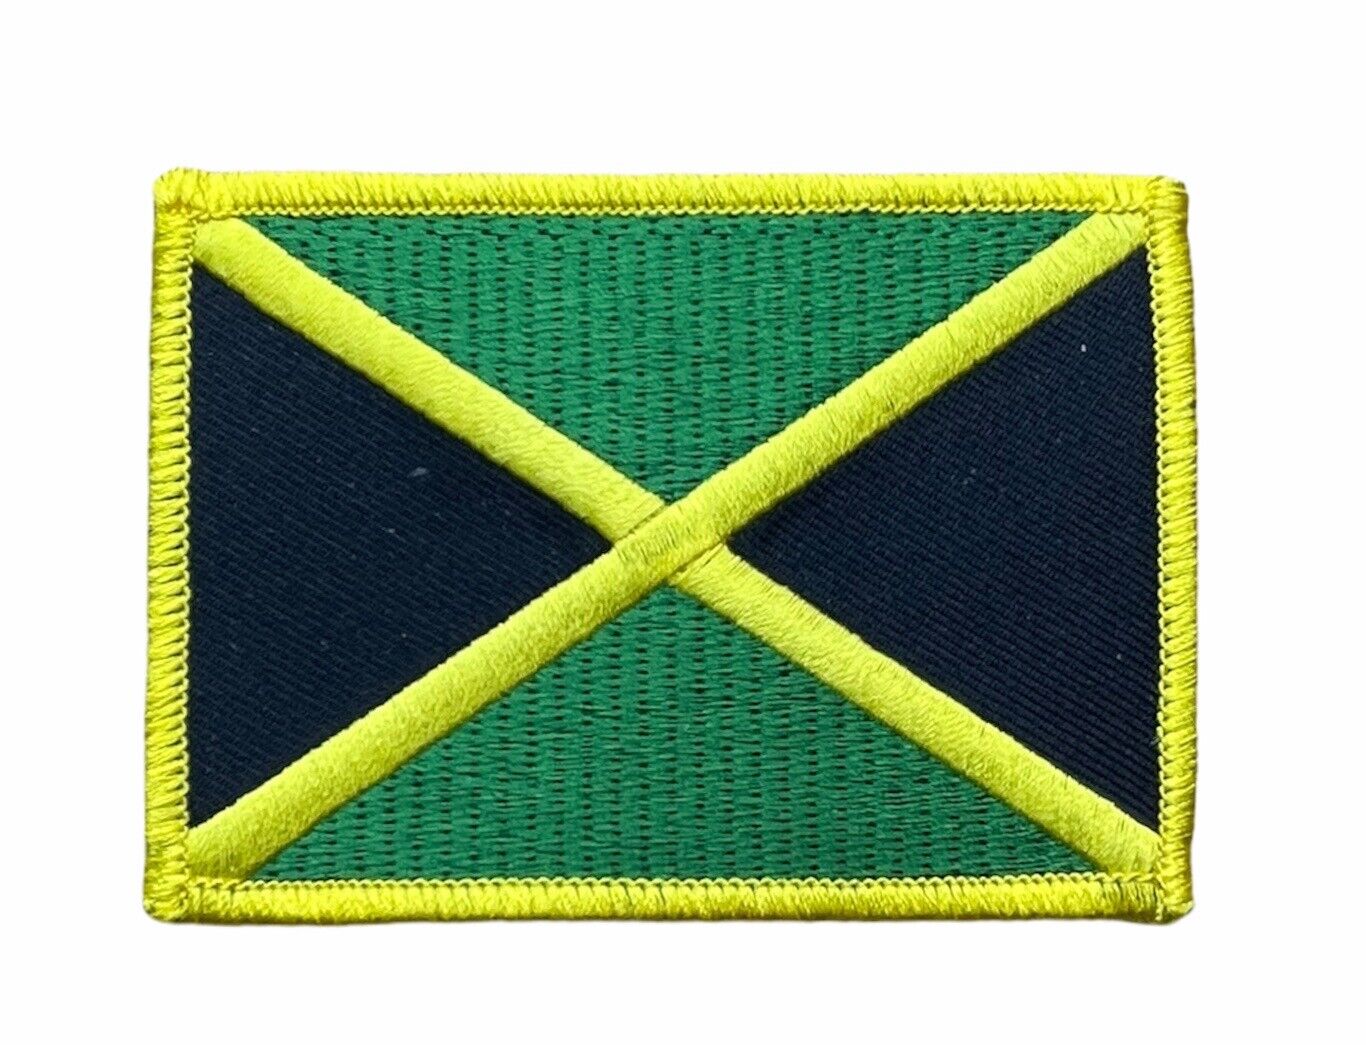 Jamaica Country Of Flag 3.5 Inch Patch Ee6057 F6d34u